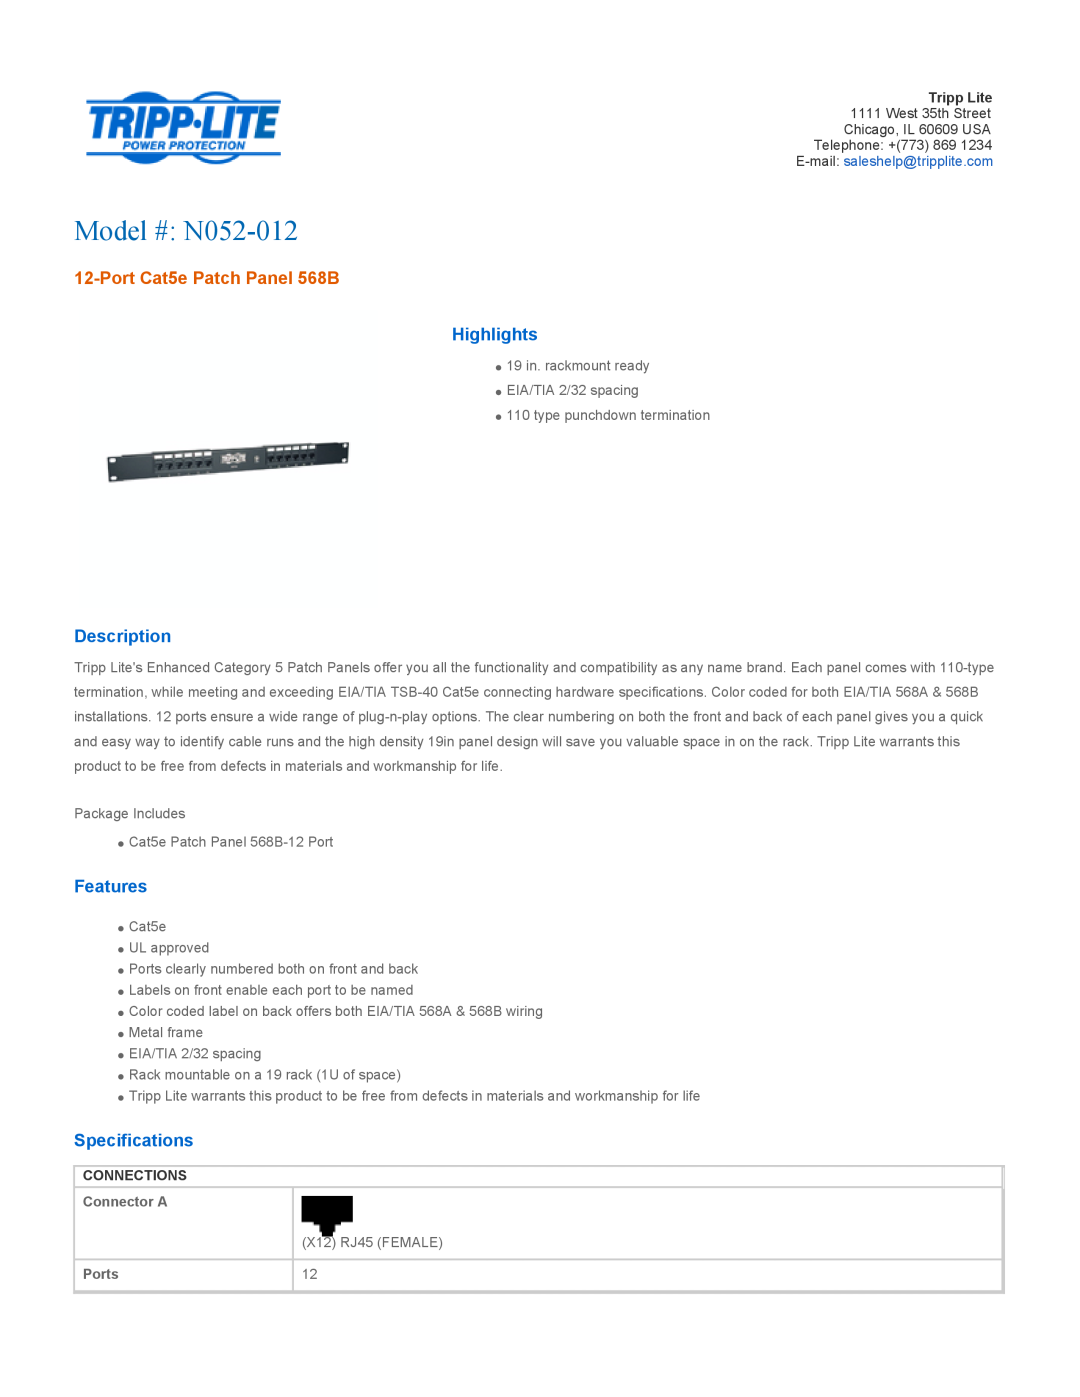 Tripp Lite specifications Highlights, Description, Features, Specifications, Connections, Model # N052-012, Connector A 